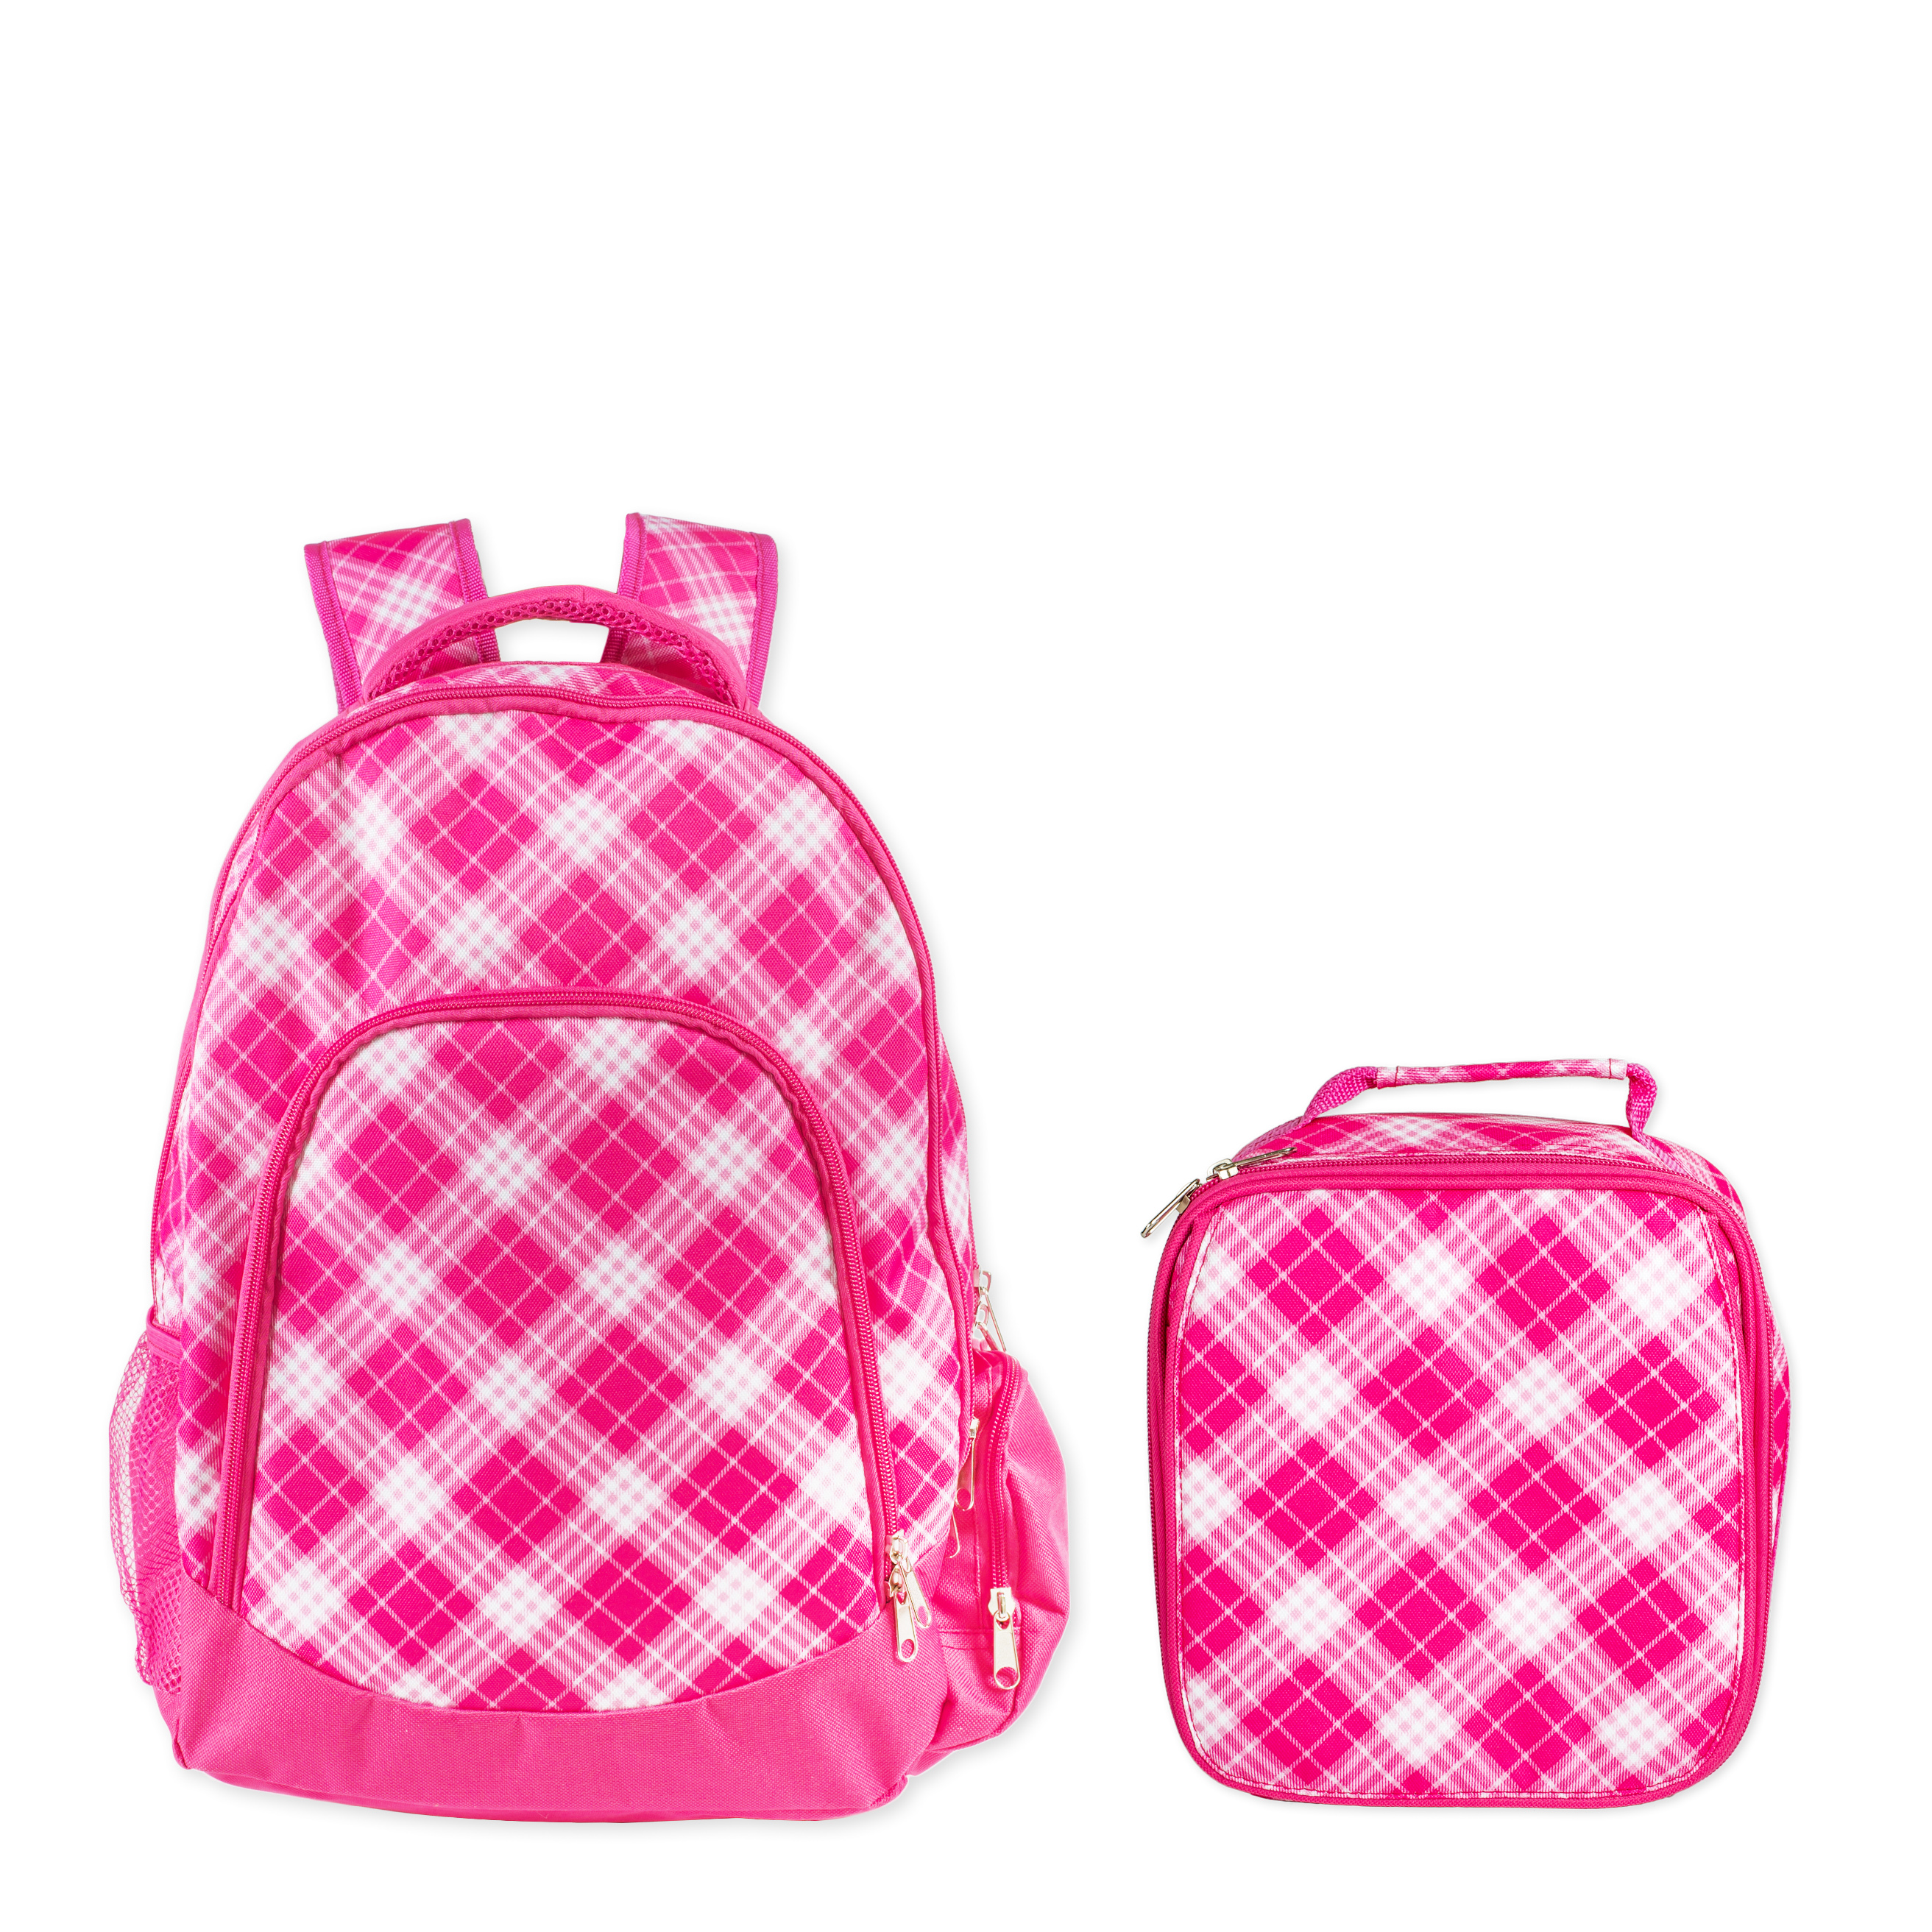 Class Collections Reinforced Water Resistant School Backpack and Insulated Lunch Bag Set - Pink Preppy Plaid - image 1 of 2